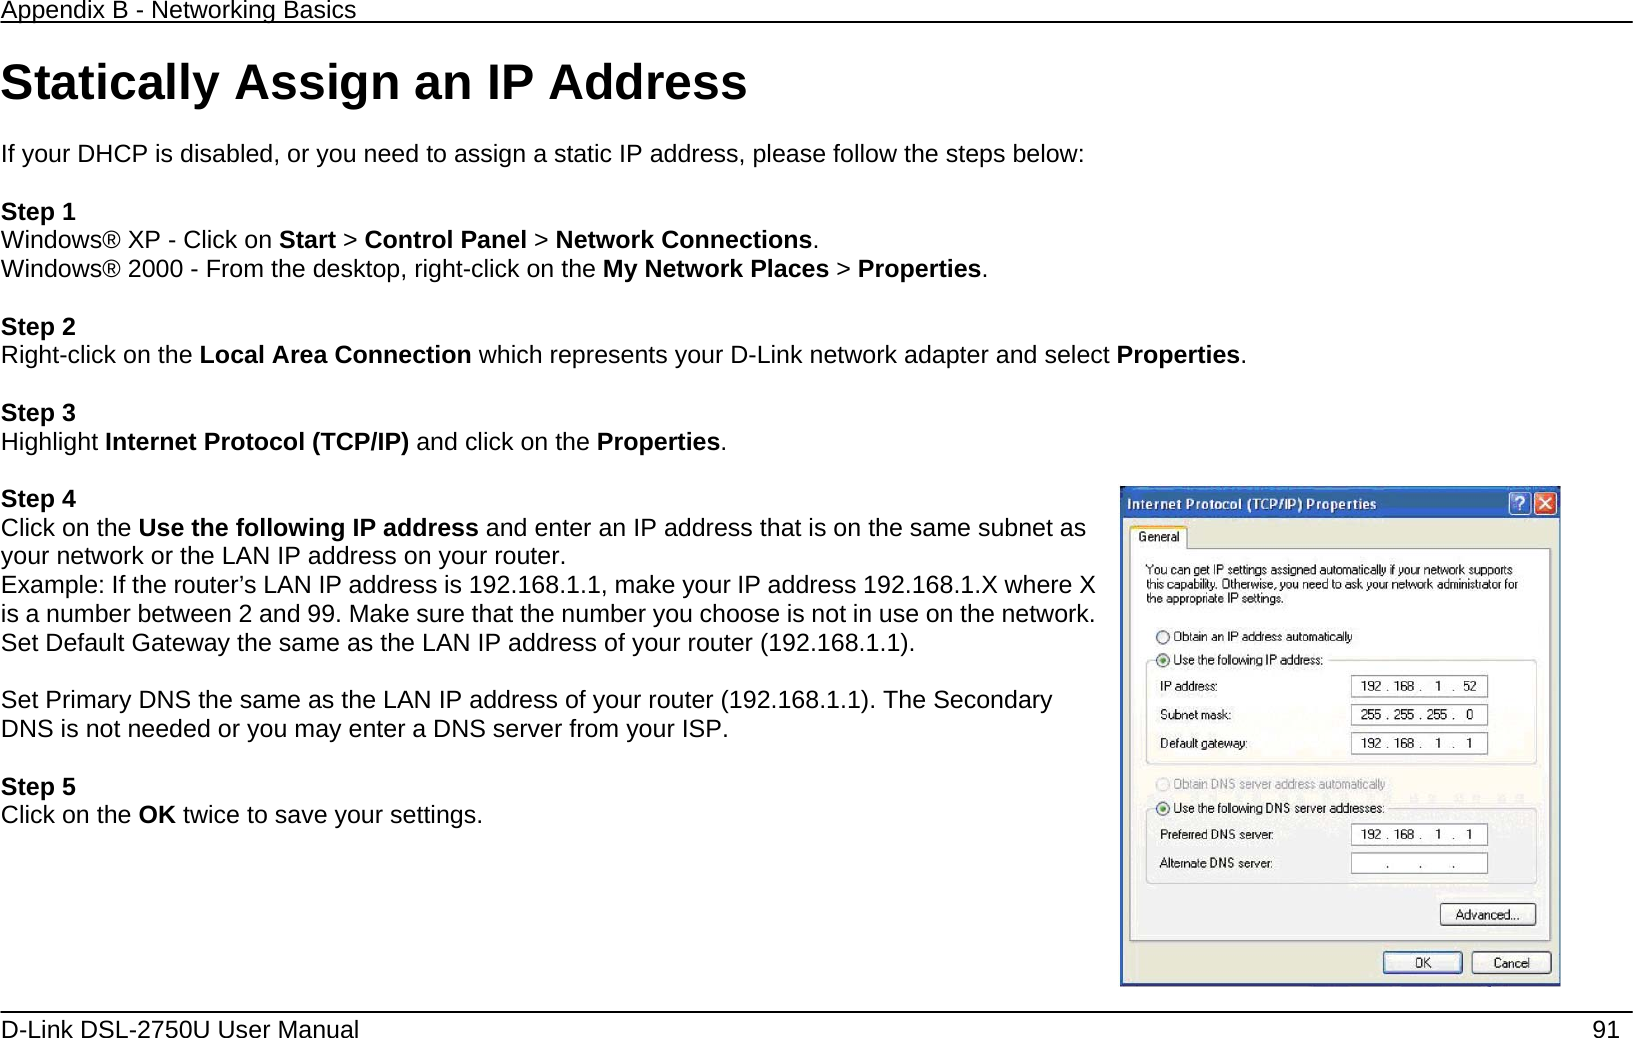 Appendix B - Networking Basics   D-Link DSL-2750U User Manual    91 Statically Assign an IP Address  If your DHCP is disabled, or you need to assign a static IP address, please follow the steps below:  Step 1 Windows® XP - Click on Start &gt; Control Panel &gt; Network Connections. Windows® 2000 - From the desktop, right-click on the My Network Places &gt; Properties.  Step 2 Right-click on the Local Area Connection which represents your D-Link network adapter and select Properties.  Step 3 Highlight Internet Protocol (TCP/IP) and click on the Properties.  Step 4 Click on the Use the following IP address and enter an IP address that is on the same subnet as your network or the LAN IP address on your router. Example: If the router’s LAN IP address is 192.168.1.1, make your IP address 192.168.1.X where X is a number between 2 and 99. Make sure that the number you choose is not in use on the network. Set Default Gateway the same as the LAN IP address of your router (192.168.1.1).  Set Primary DNS the same as the LAN IP address of your router (192.168.1.1). The Secondary DNS is not needed or you may enter a DNS server from your ISP.  Step 5 Click on the OK twice to save your settings.   